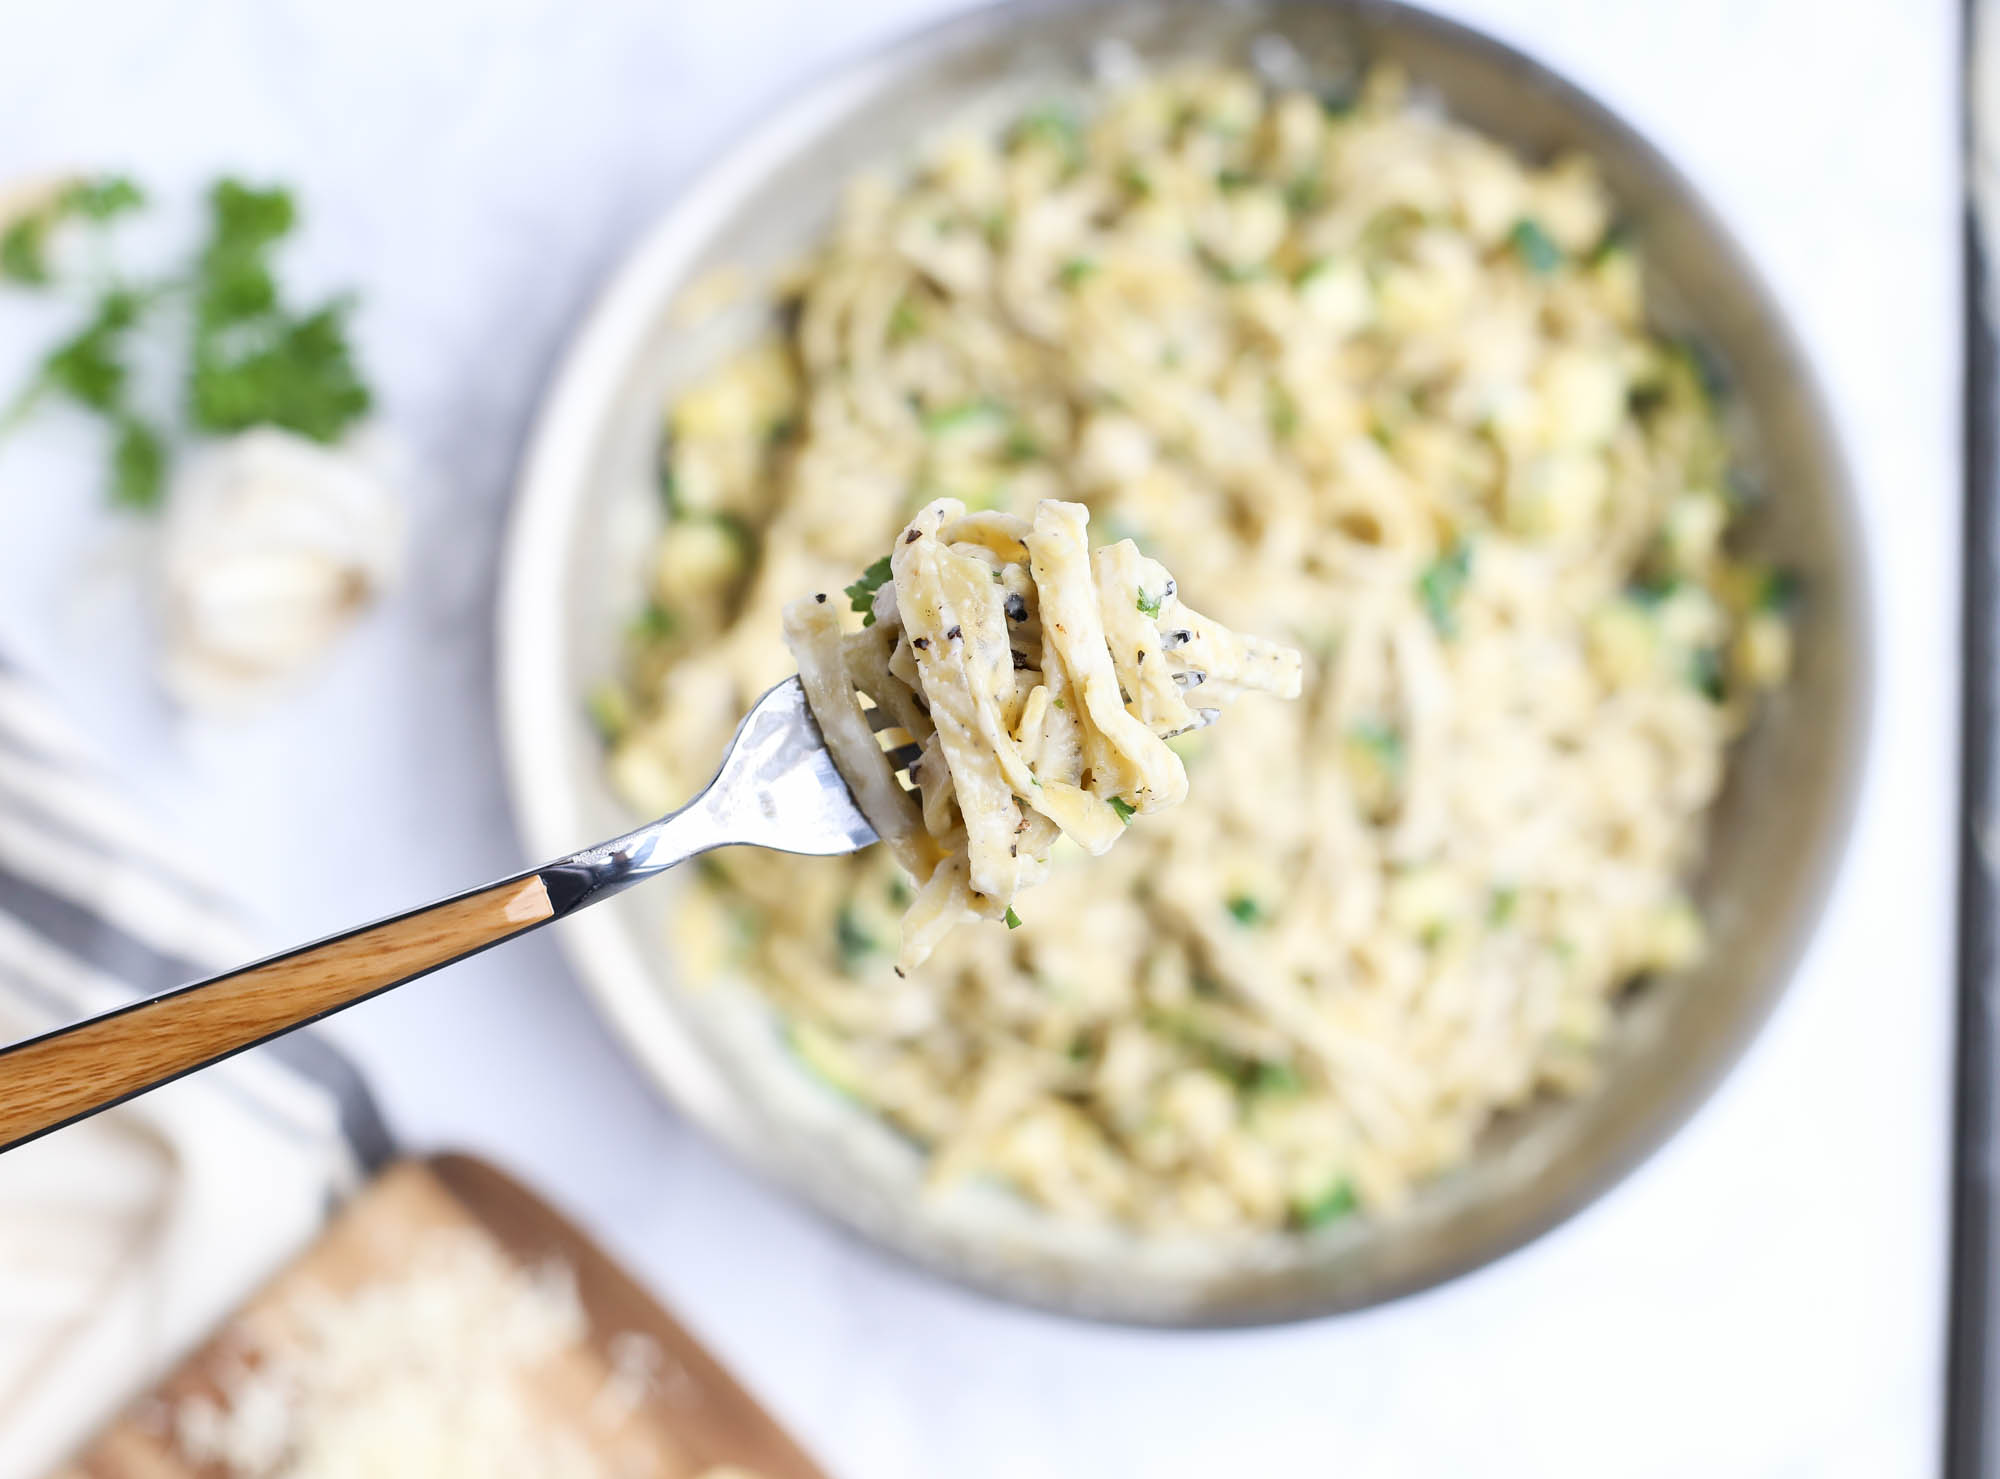 Healthier Fettuccine Alfredo from The District Table